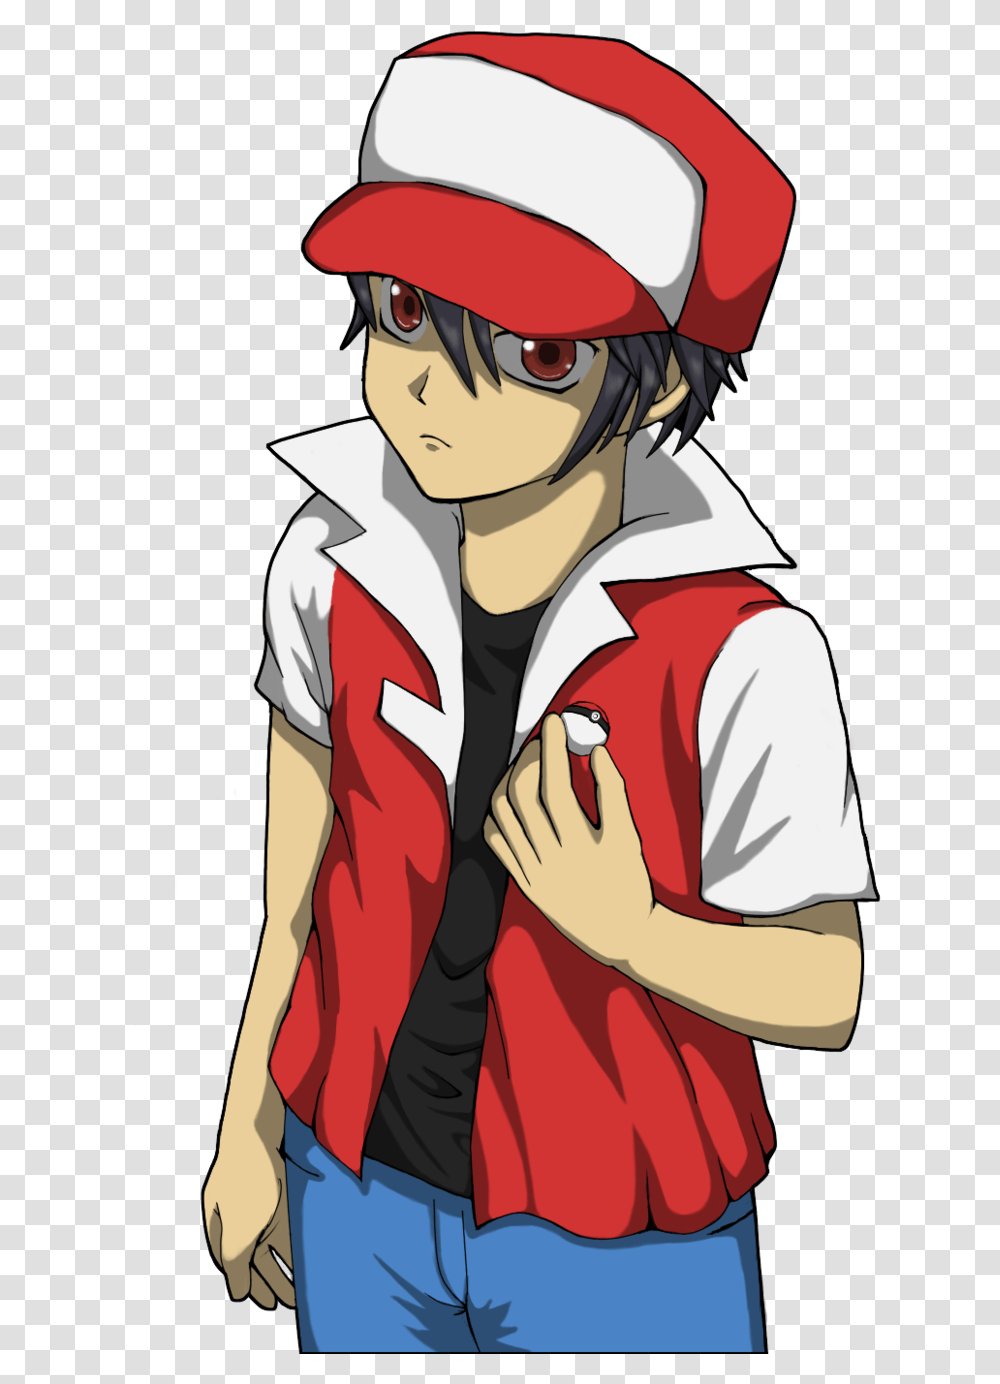 Pokemon Trainer Red Vector Royalty Pokemon Trainer Red, Clothing, Apparel, Helmet, Person Transparent Png